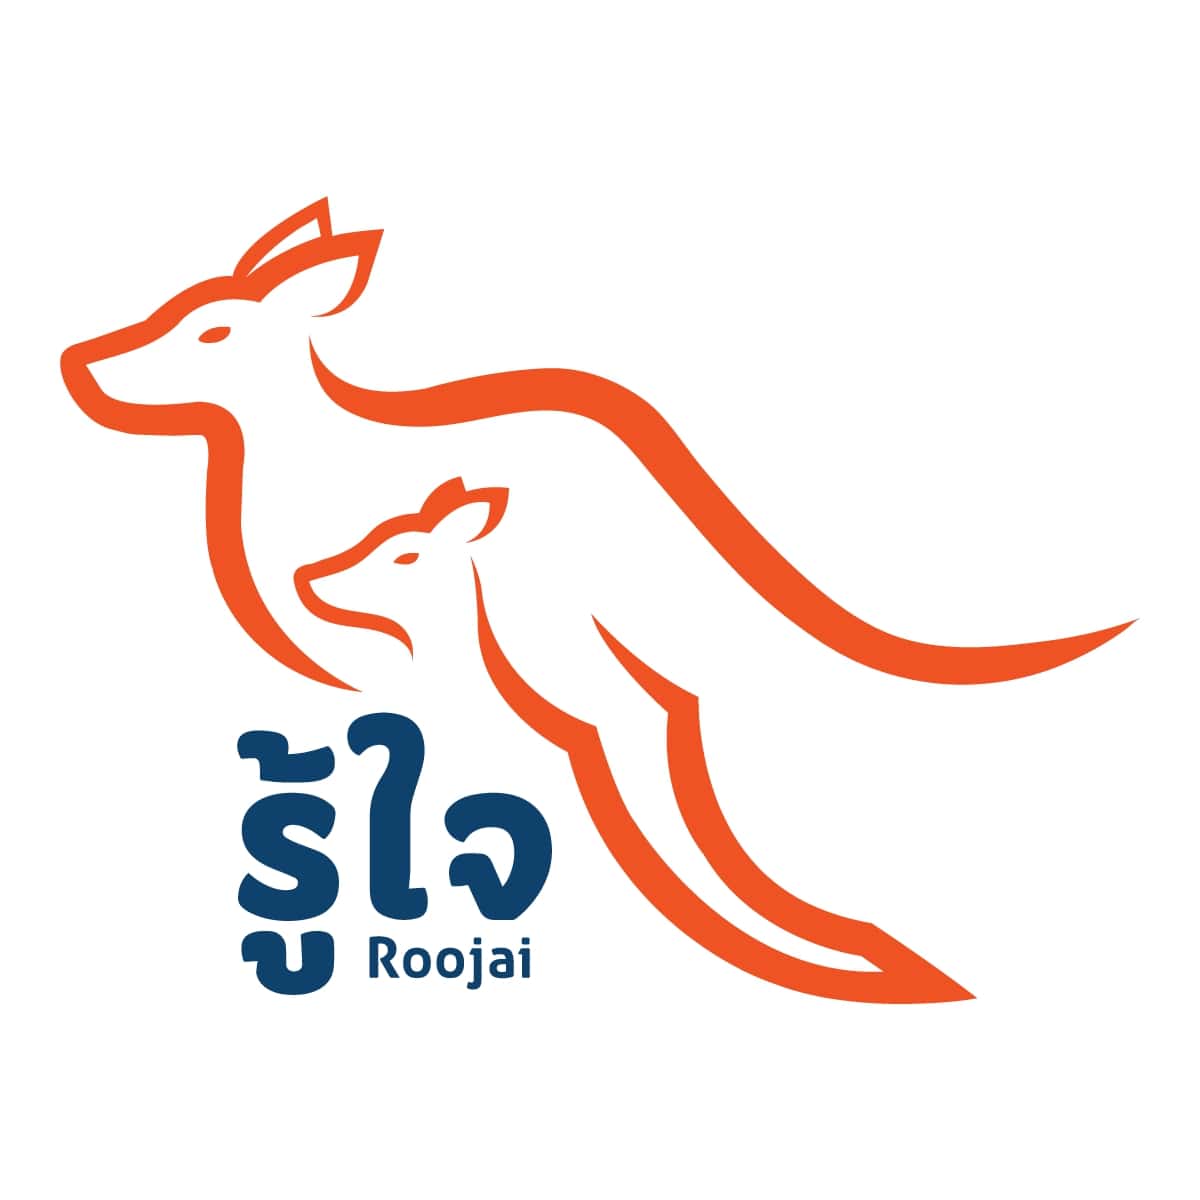 Find insurance policy, compare car insurance in thailand, get cheap insurance with Roojai